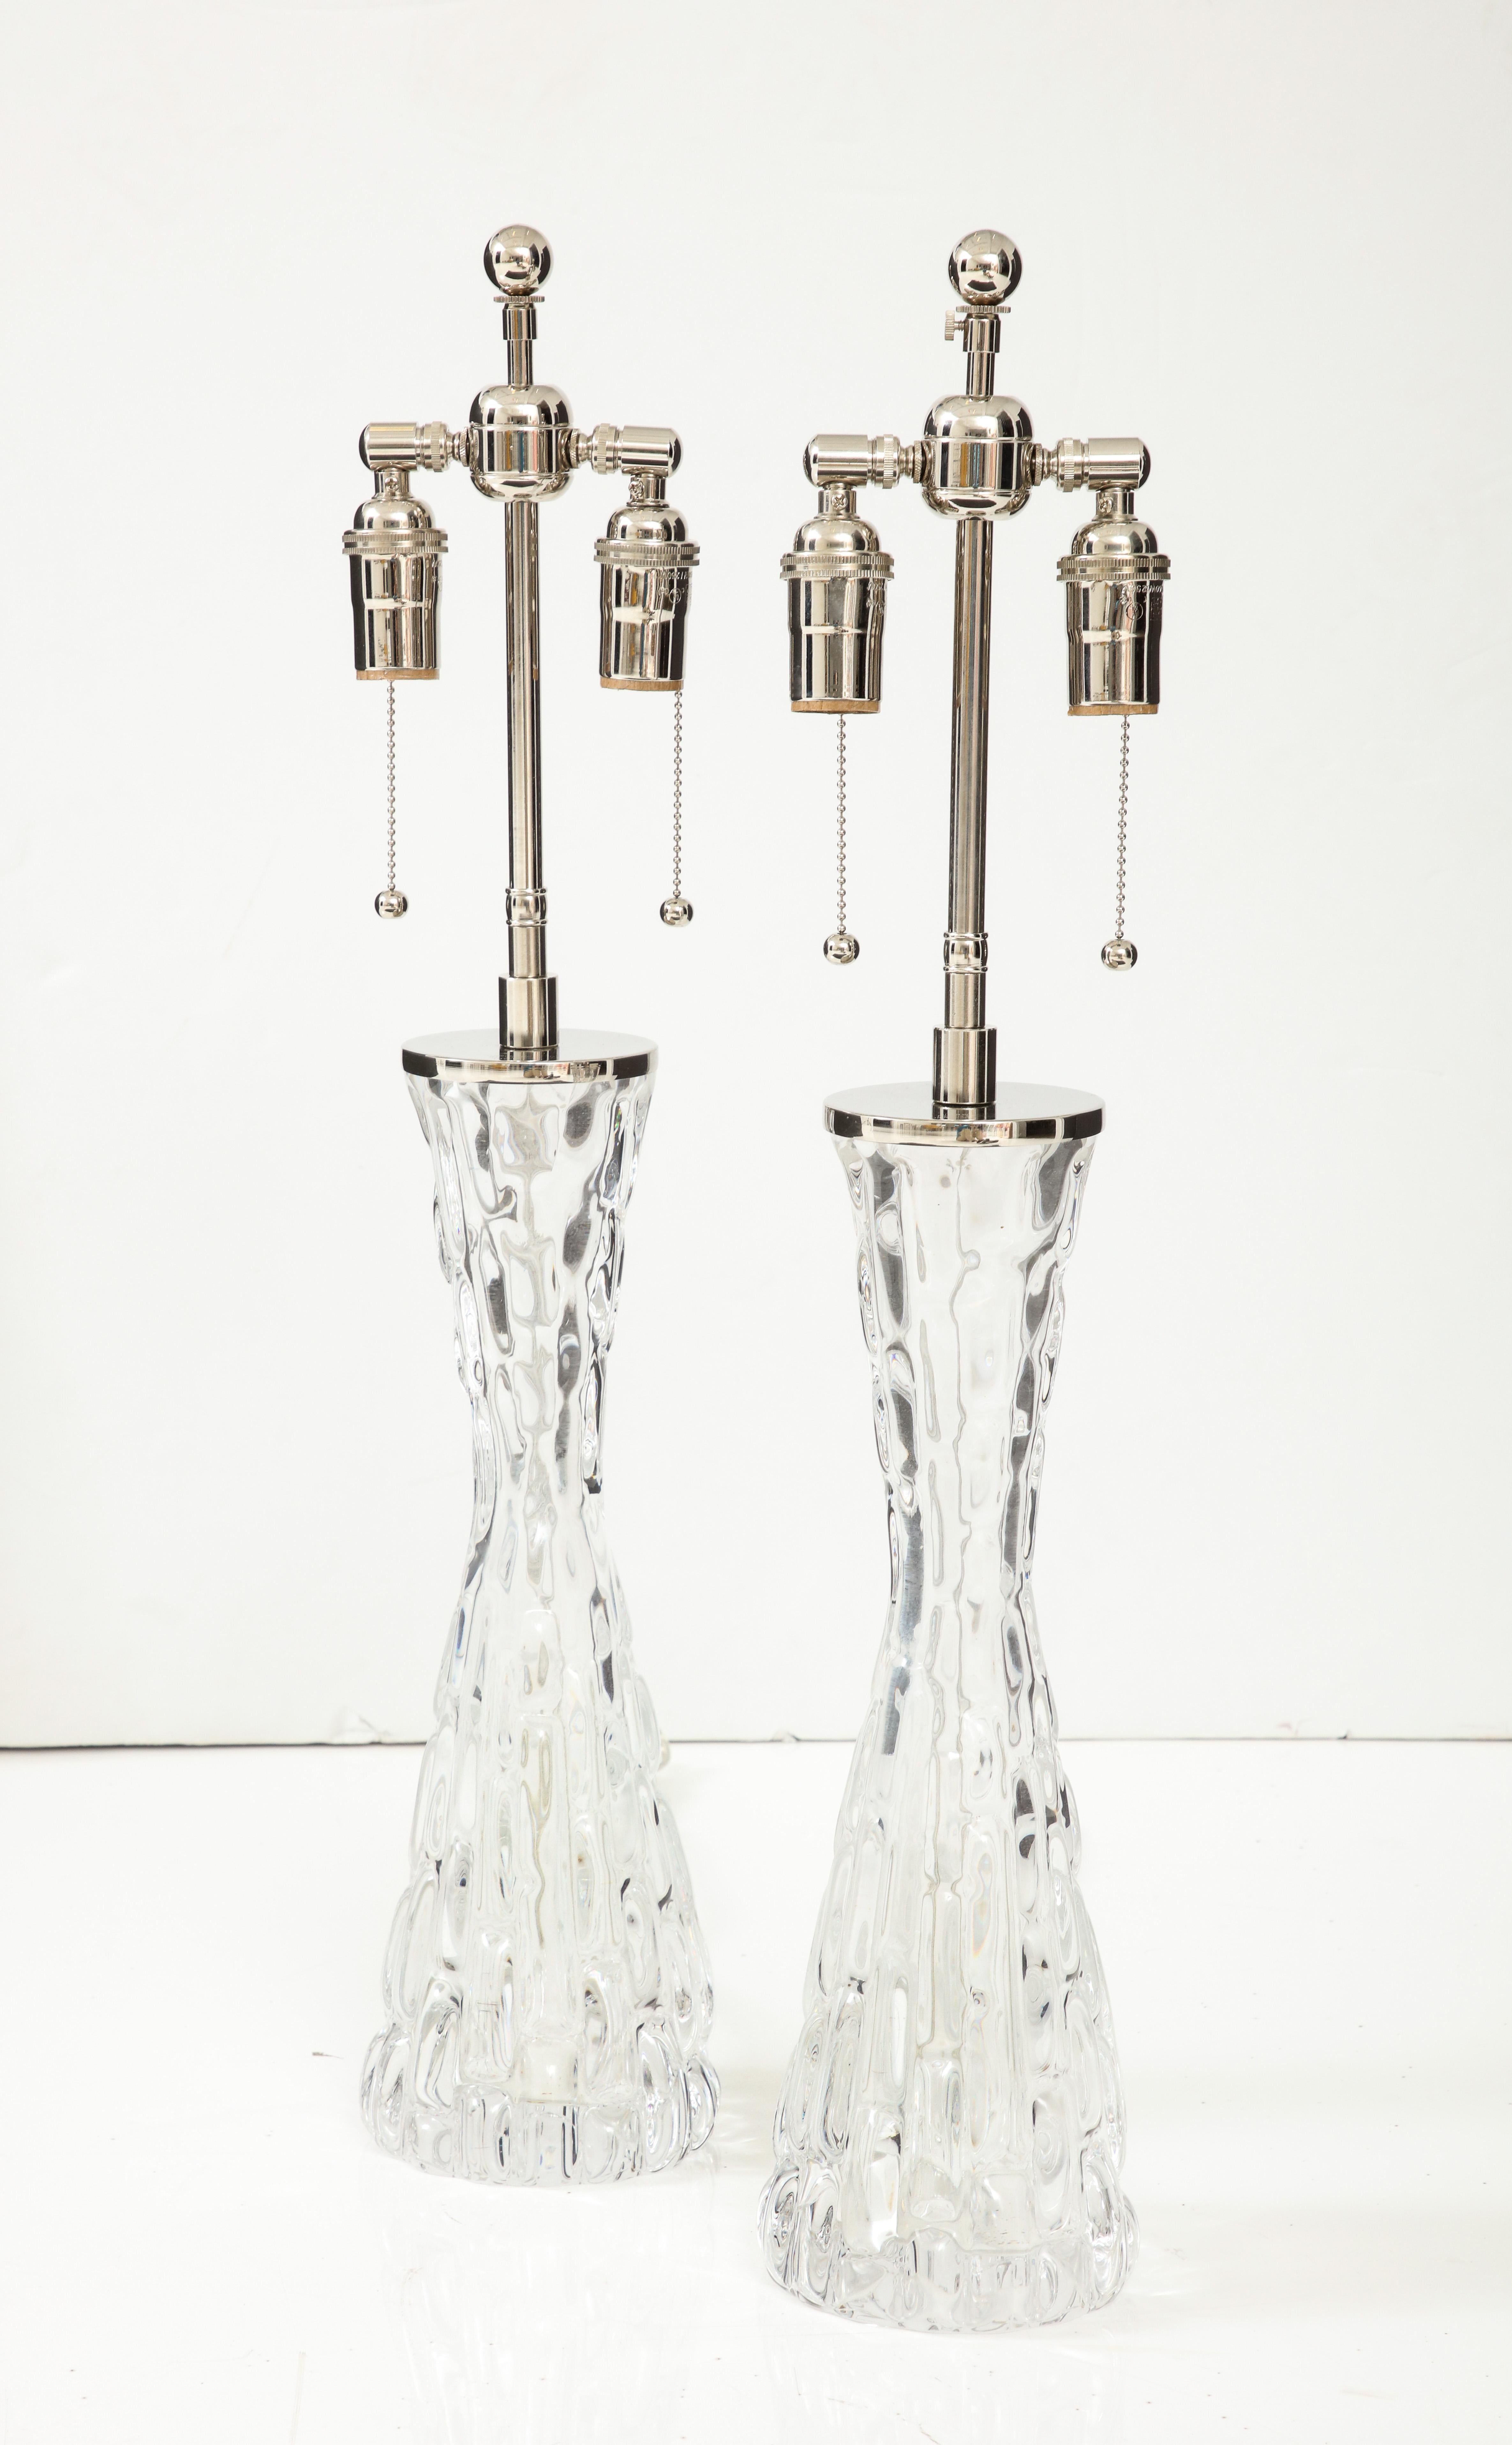 Pair of 1970's Extra large heavy Crystal lamps designed by Carl Fagerlund 
for Orrefors.
The lamps have been newly rewired with polished chrome adjustable double clusters that take standard size light bulbs.
60 Watts per socket / 120 watts per